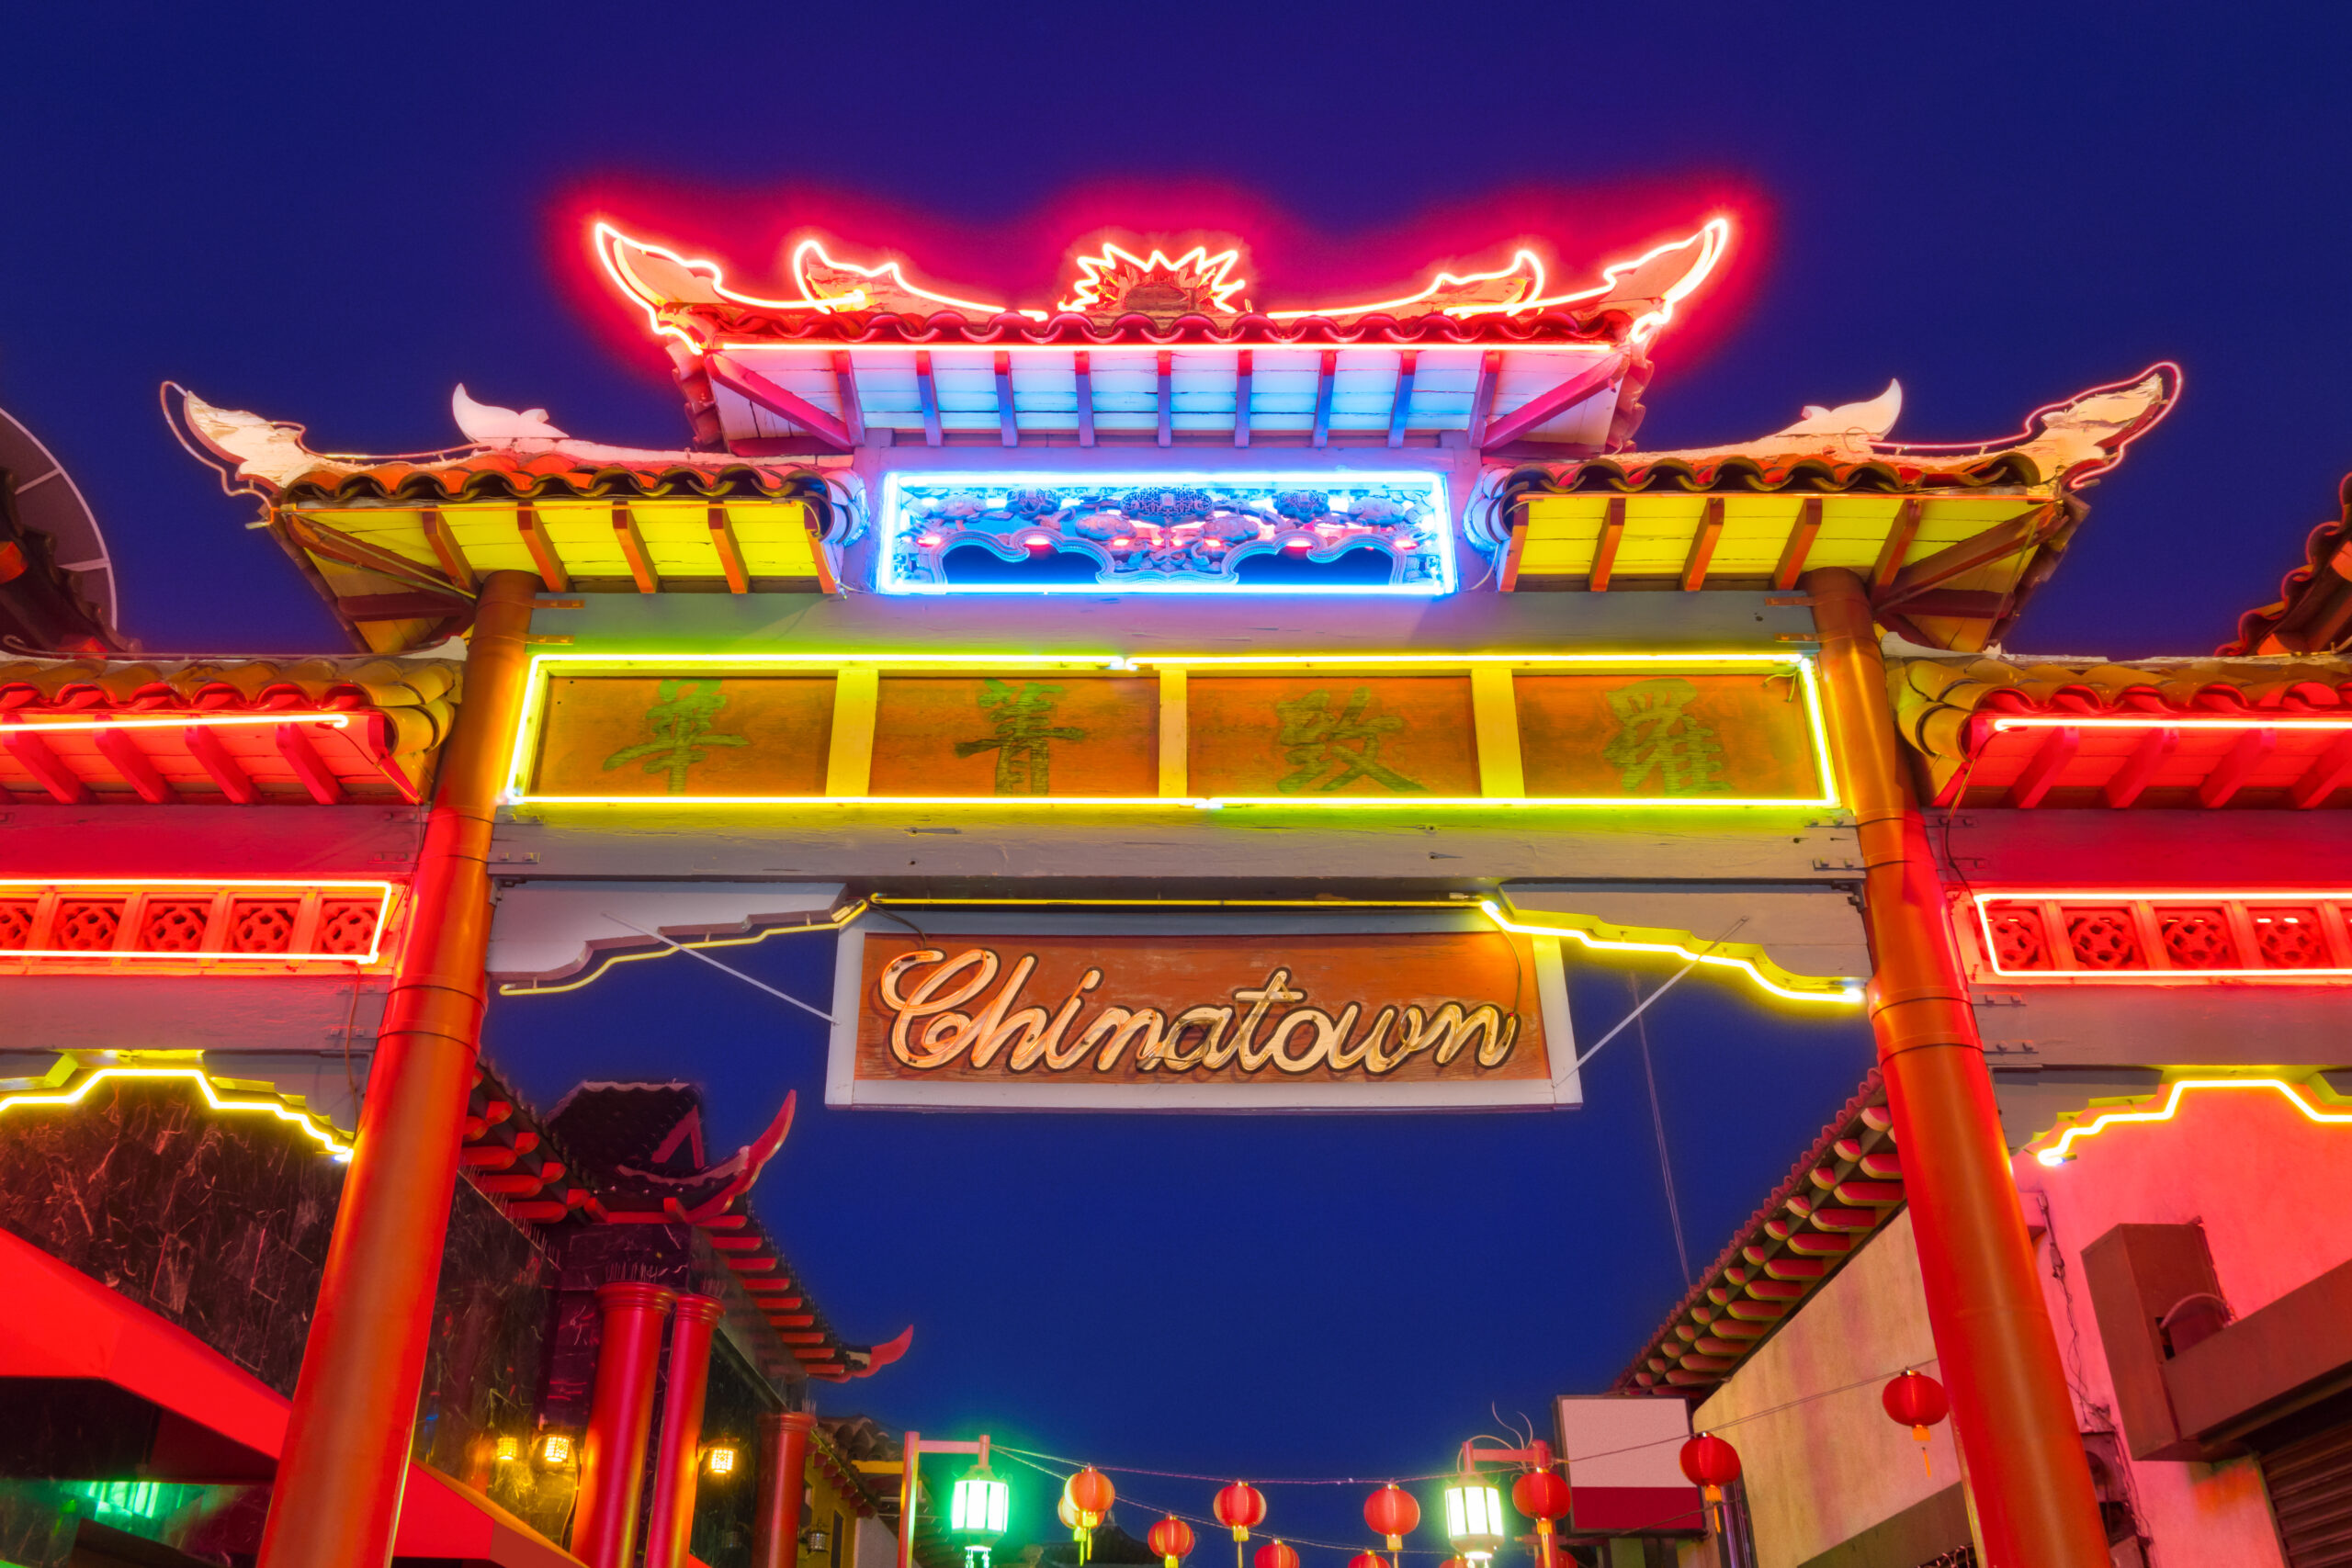 Supporting Chinatown Businesses in LA and San Francisco